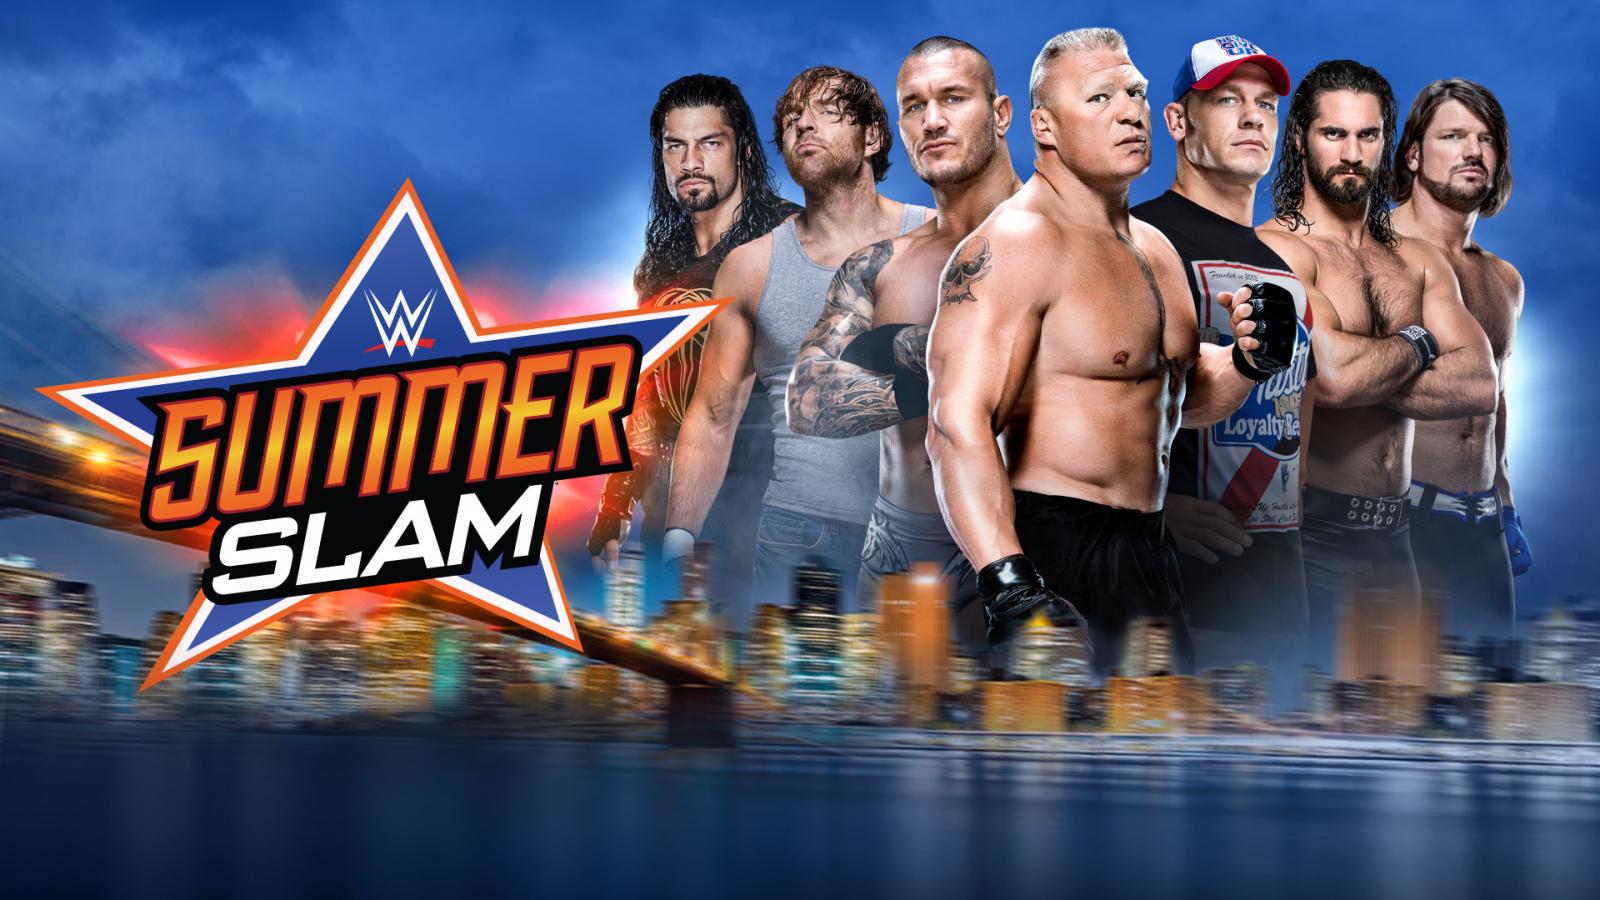 When Is WWE SummerSlam 2016? Date, Location and Start Time